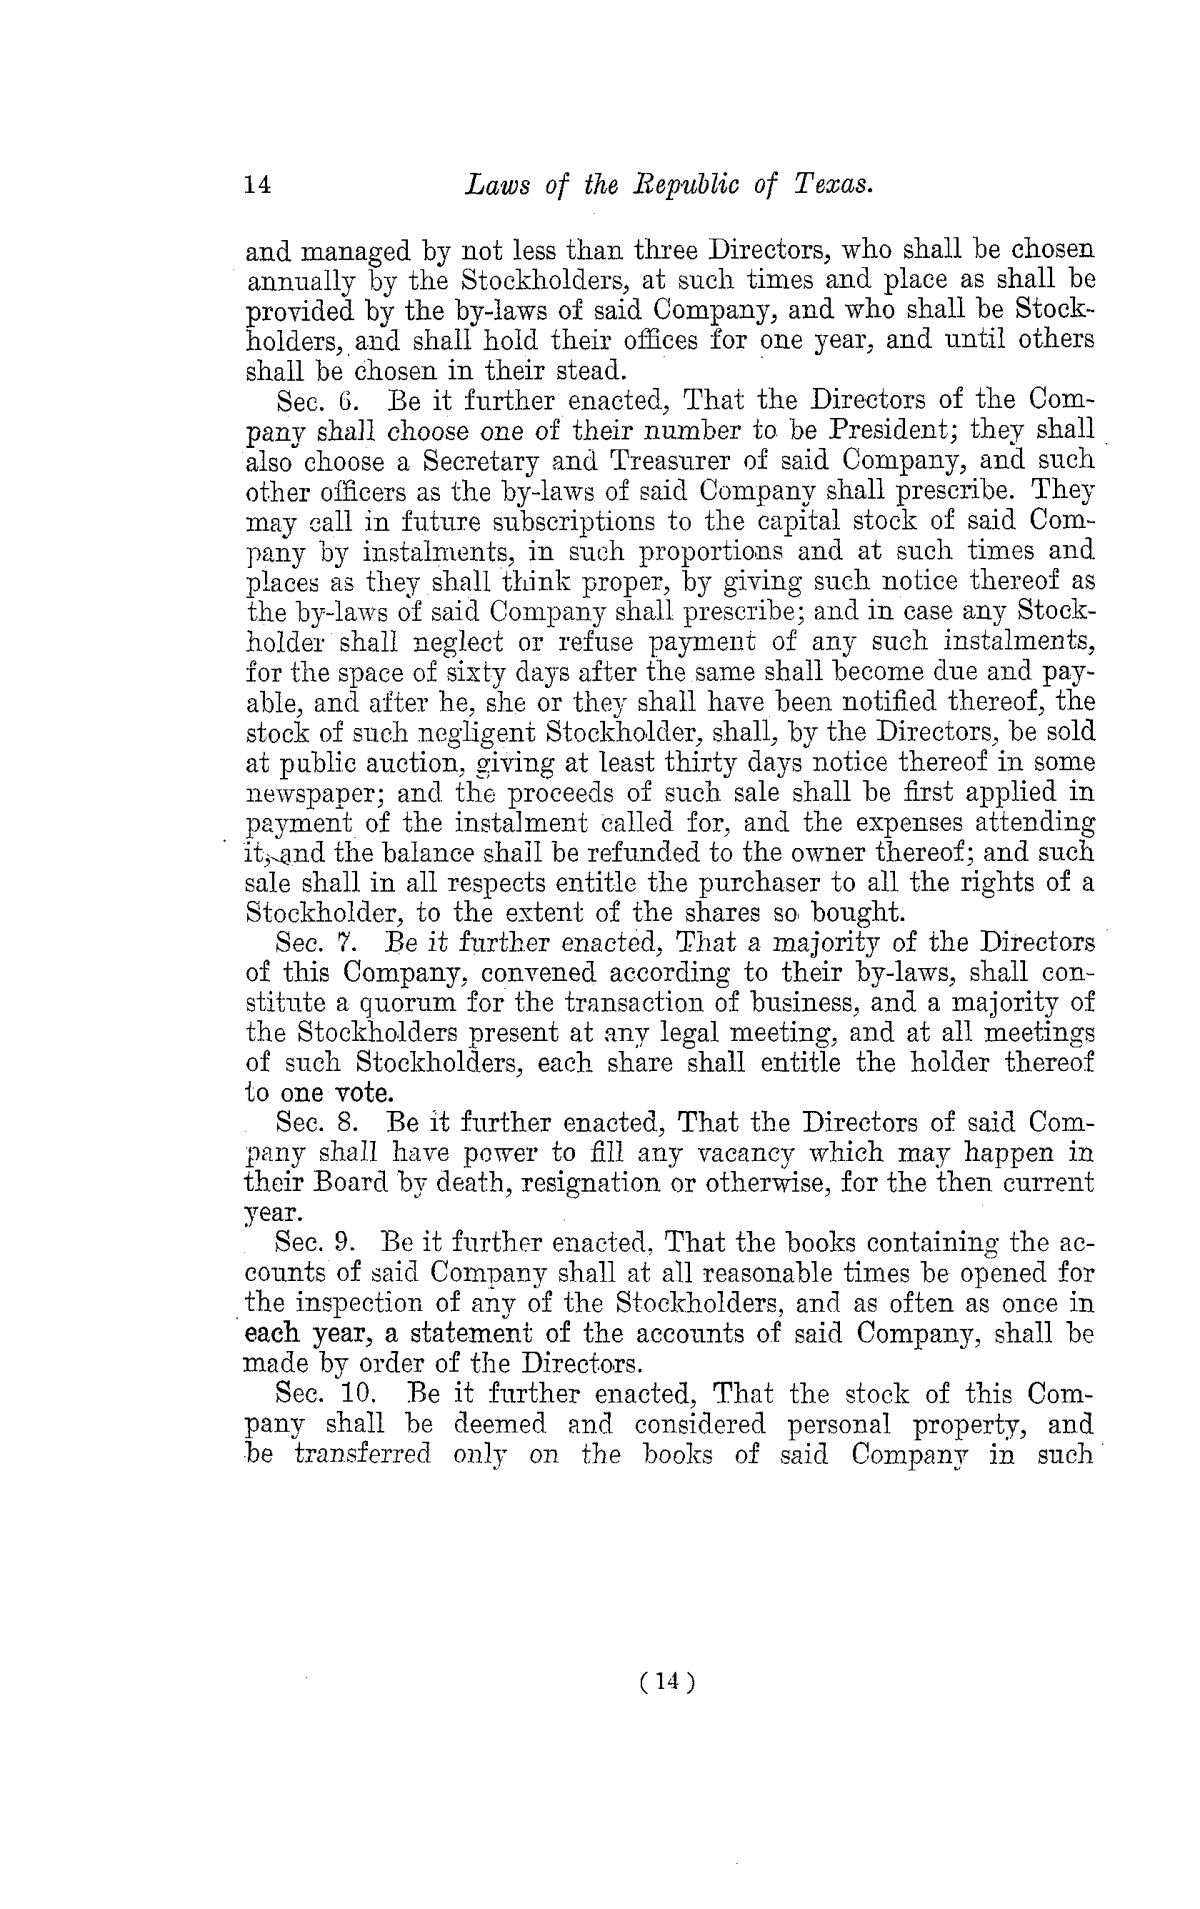 The Laws of Texas, 1822-1897 Volume 2
                                                
                                                    14
                                                